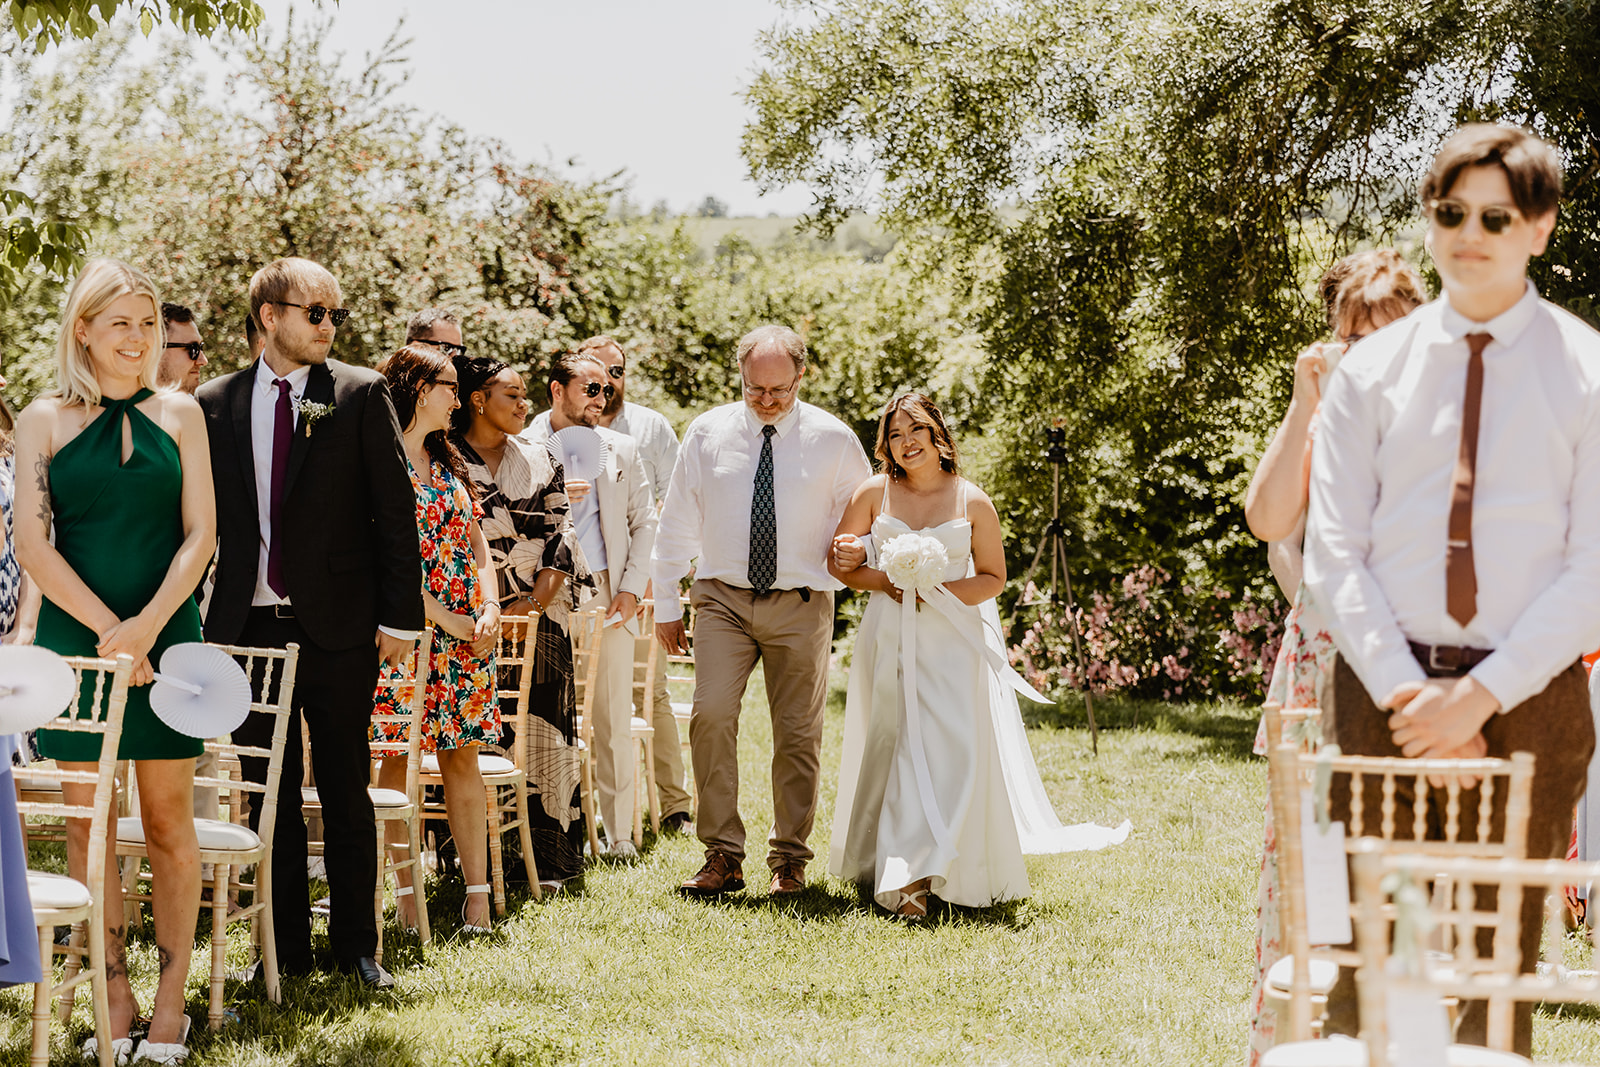 Father and bride down aisle at a Destination Wedding in France. Photography & Videography by OliveJoy Photography